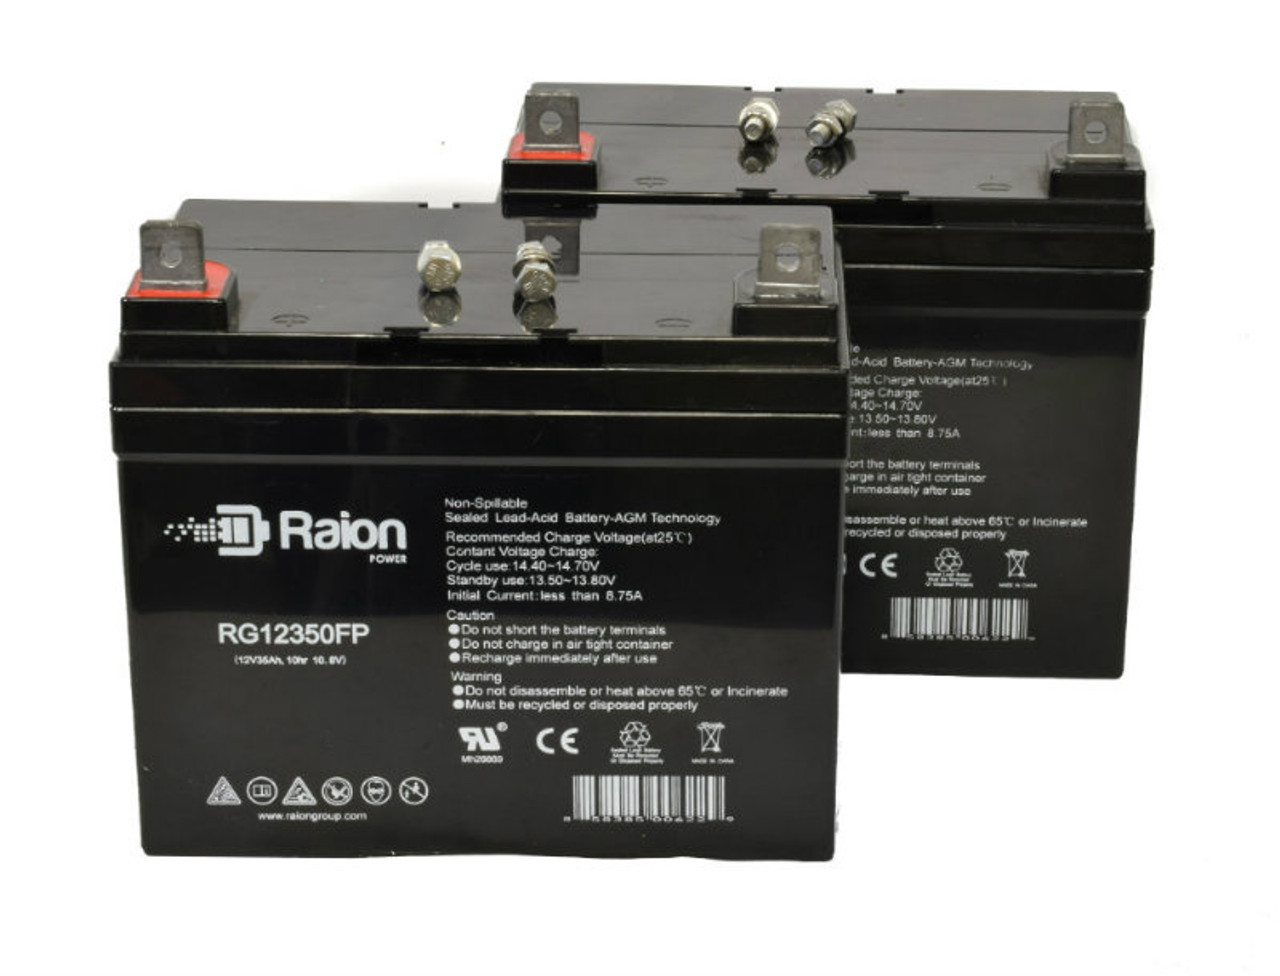 Raion Power Replacement 12V 35Ah Lawn Mower Battery for Tru-Test WE-8325 - 2 Pack